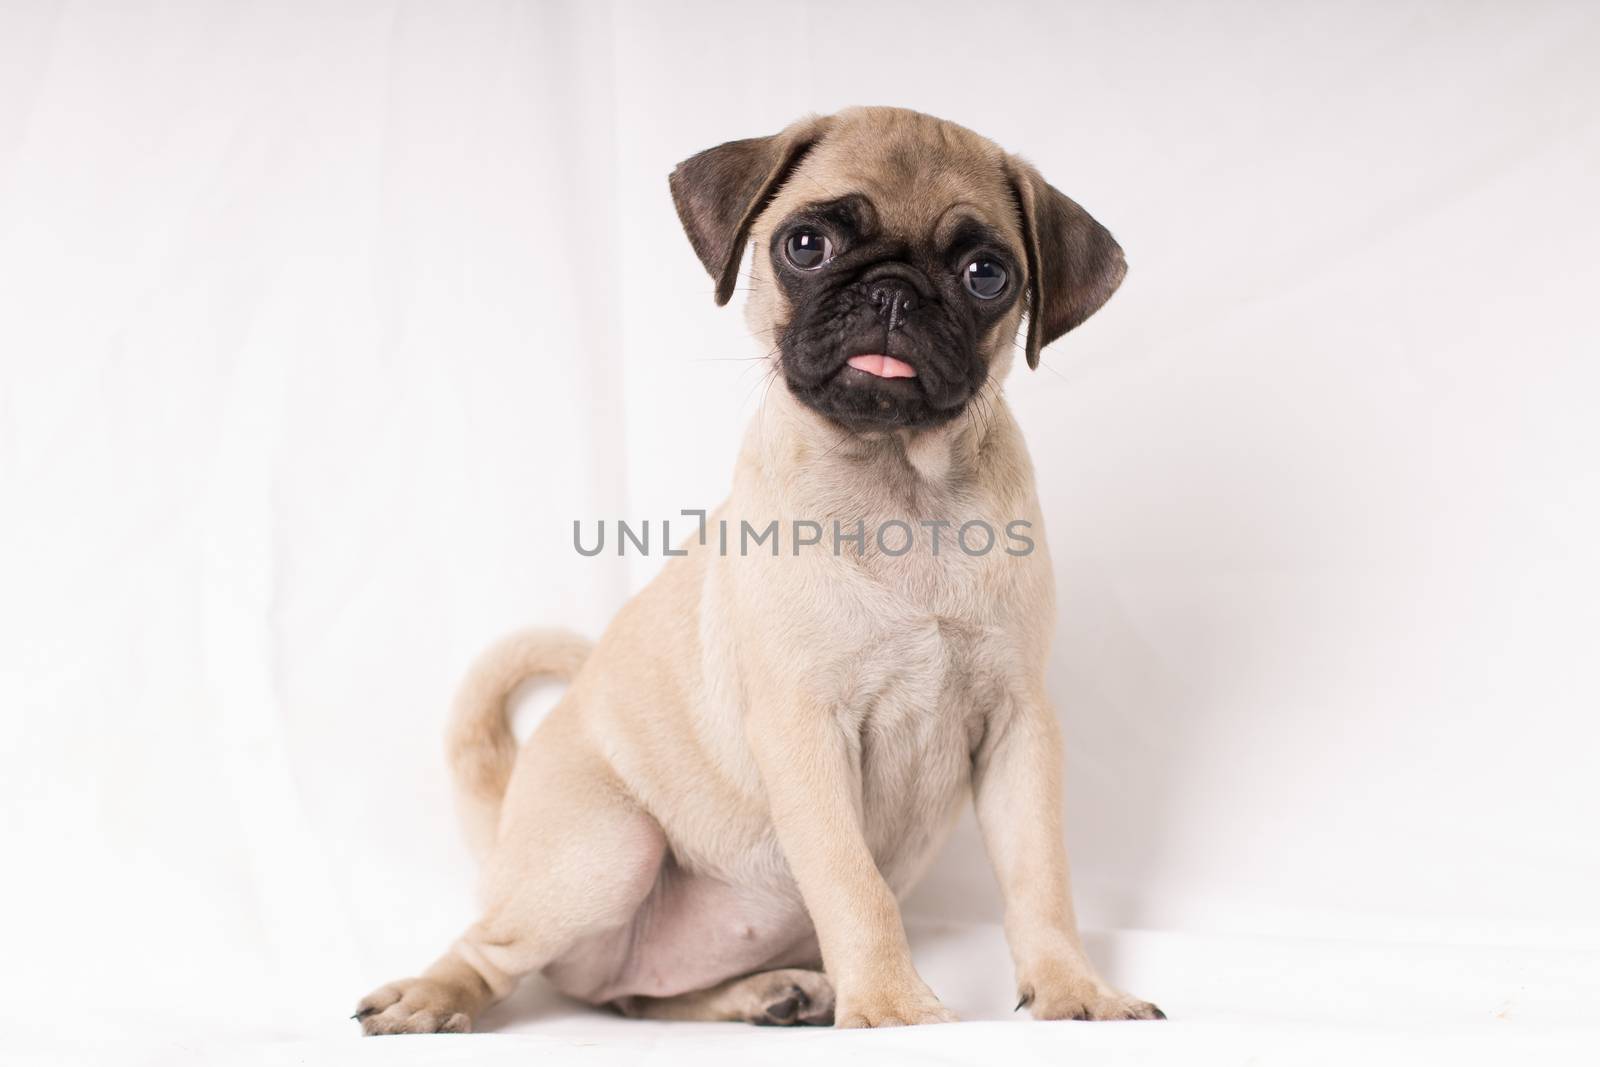 Pug, portrait of a puppy small lovely dog looking at camera isolated on white bakcground